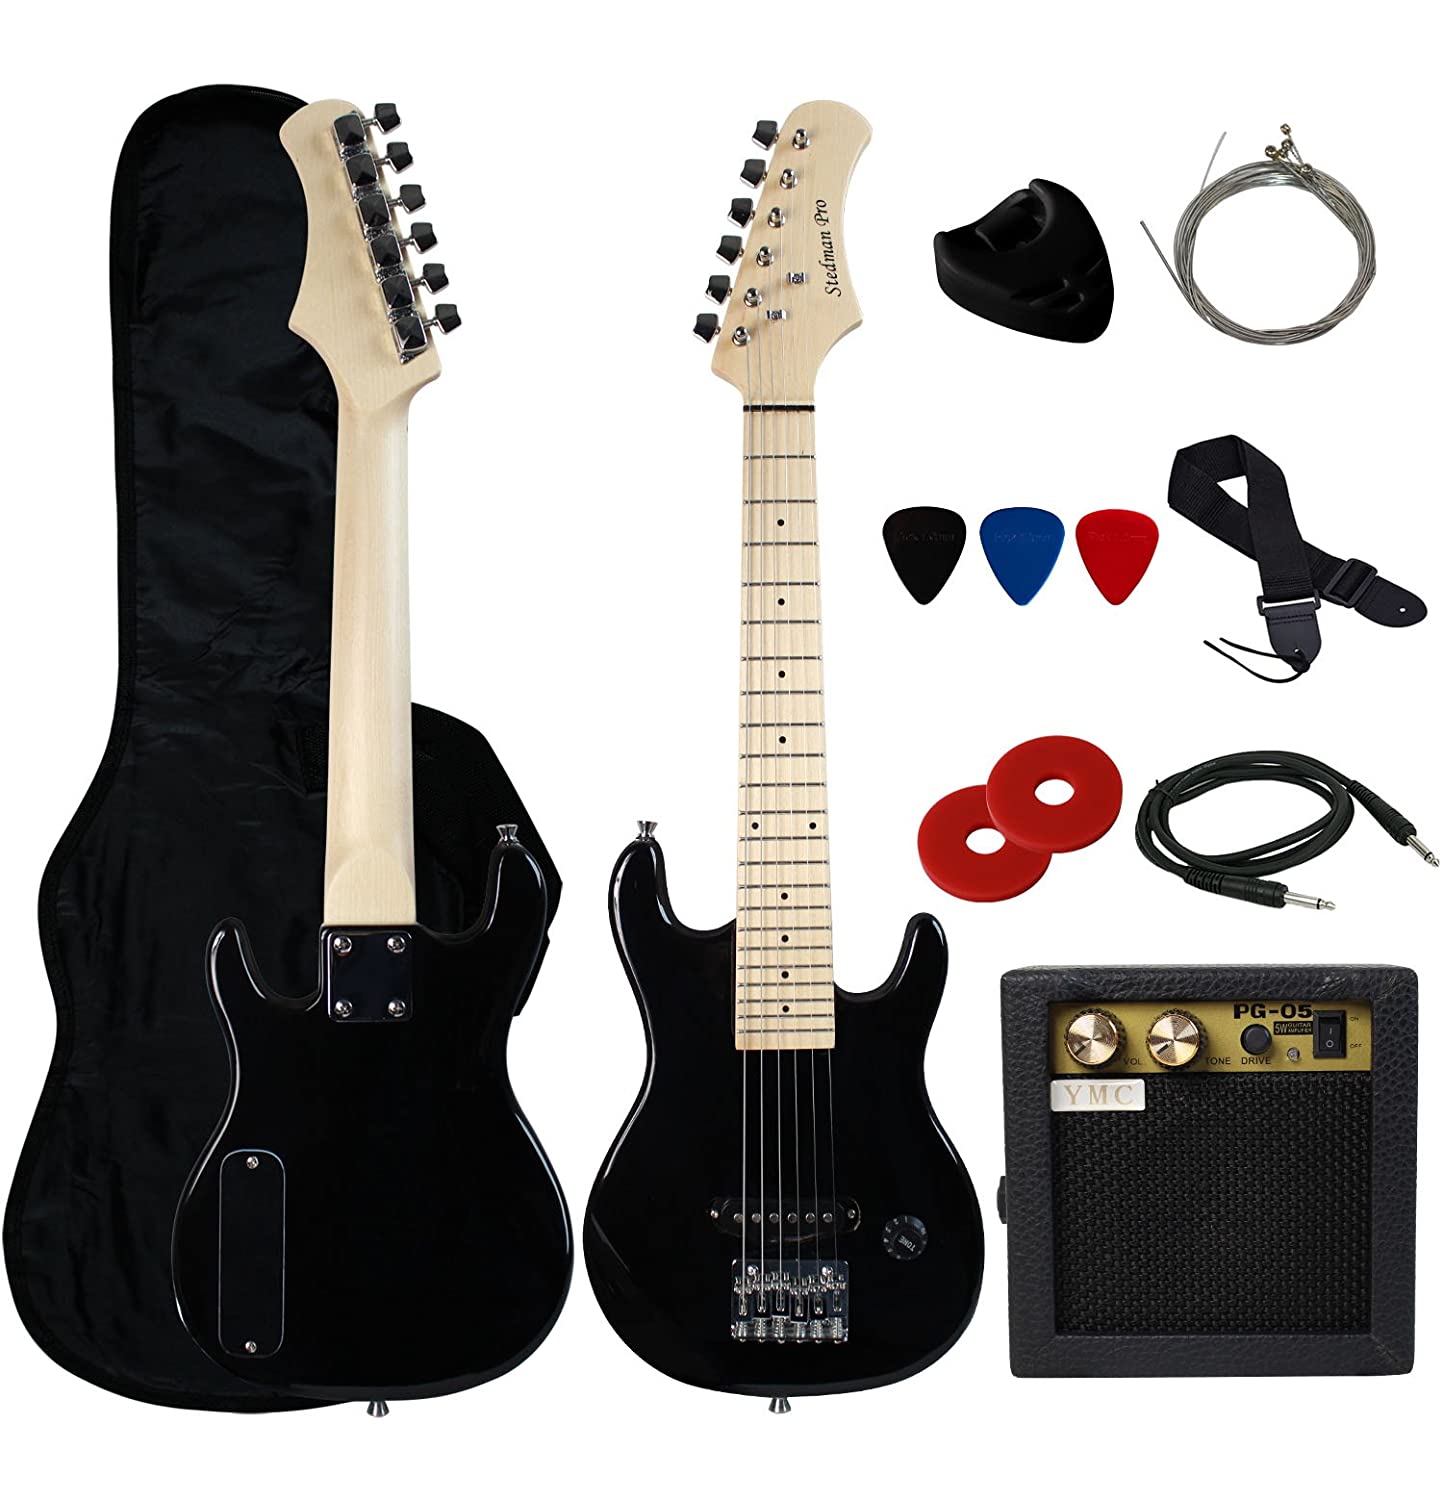 Stedman Pro 30" Kids Electric Guitar Pack With 5-Watt Amp, Gig Bag,Strap,Cable,Strings,Picks,and Wrench,Guitar Combo Accessory Kit--Black